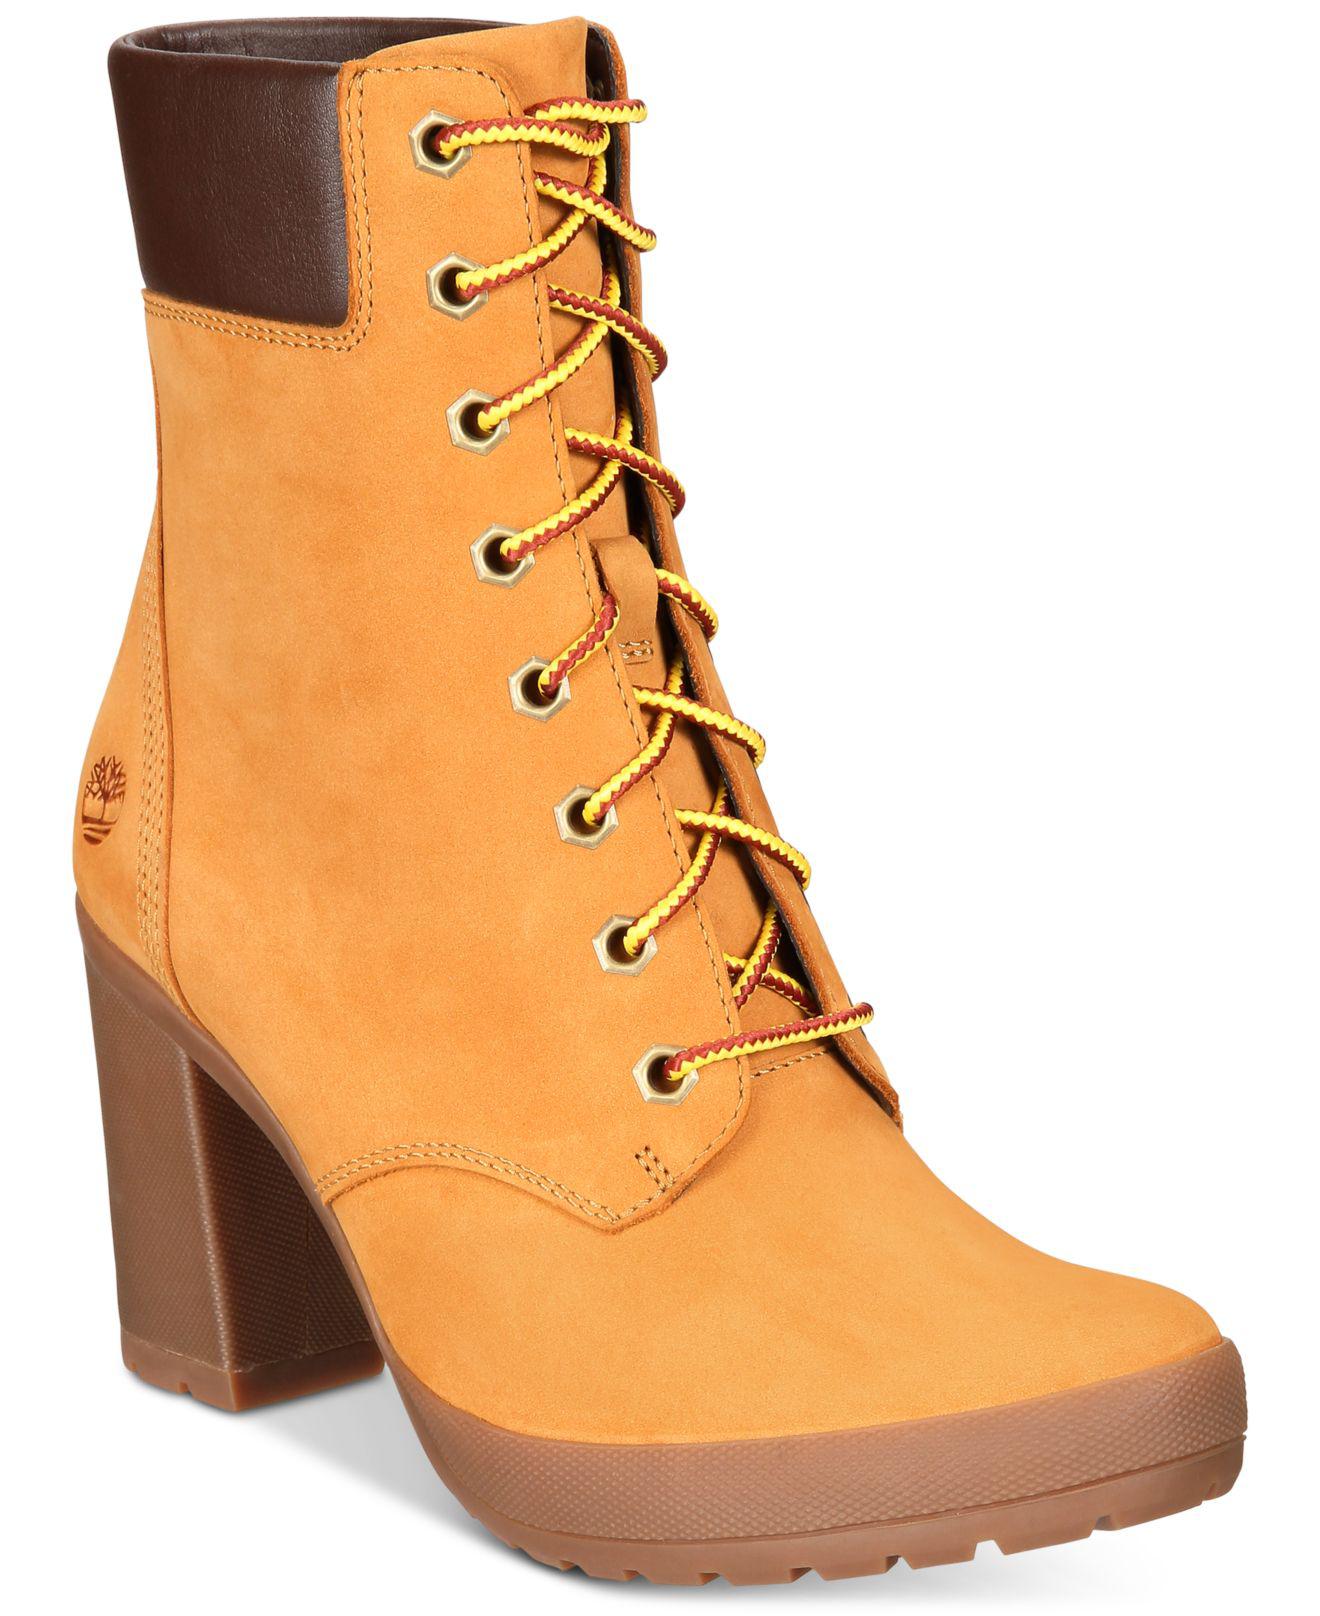 Timberland Women's Camdale Field Boots Sale Online, SAVE 45% -  lutheranems.com